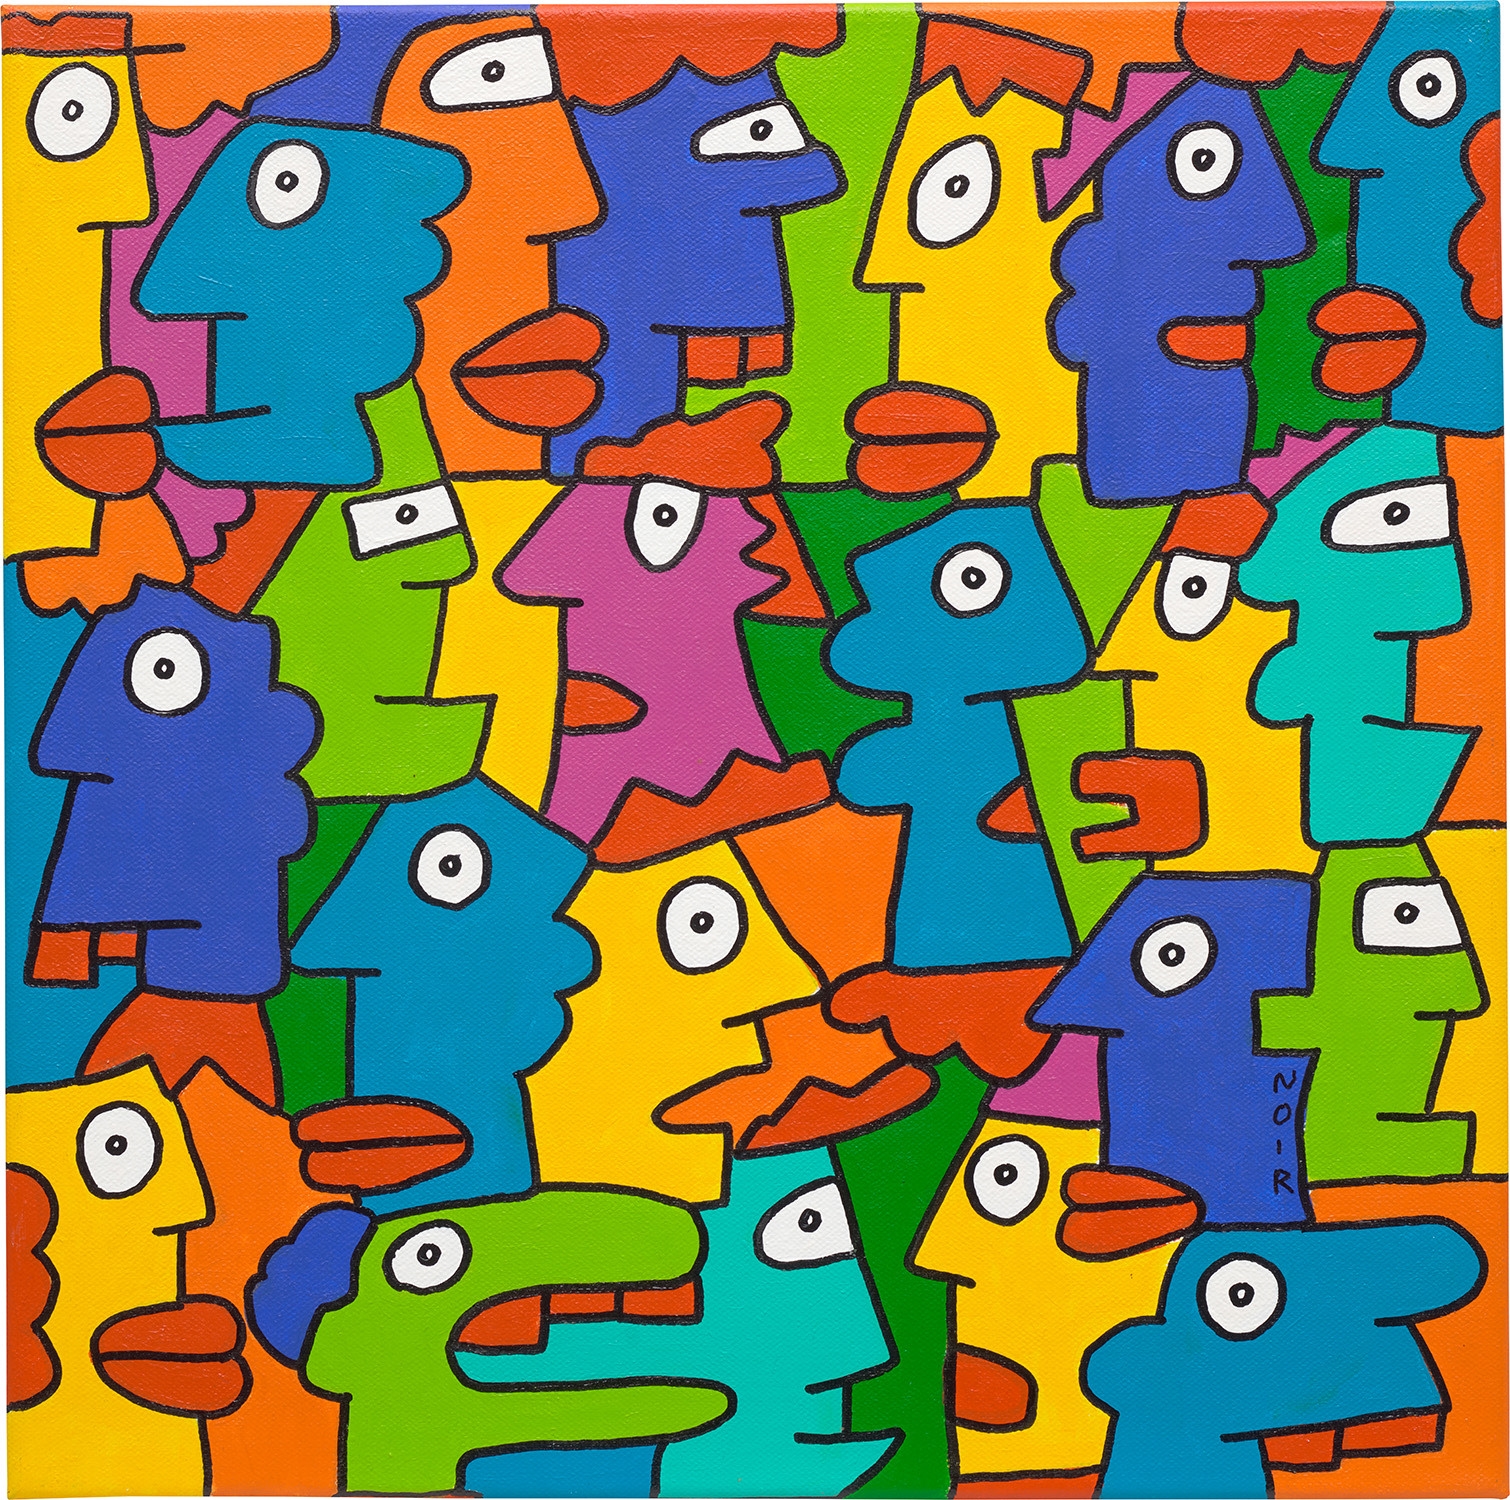 A Particularly Successful Rush Hour by Thierry Noir, Painted in 2014